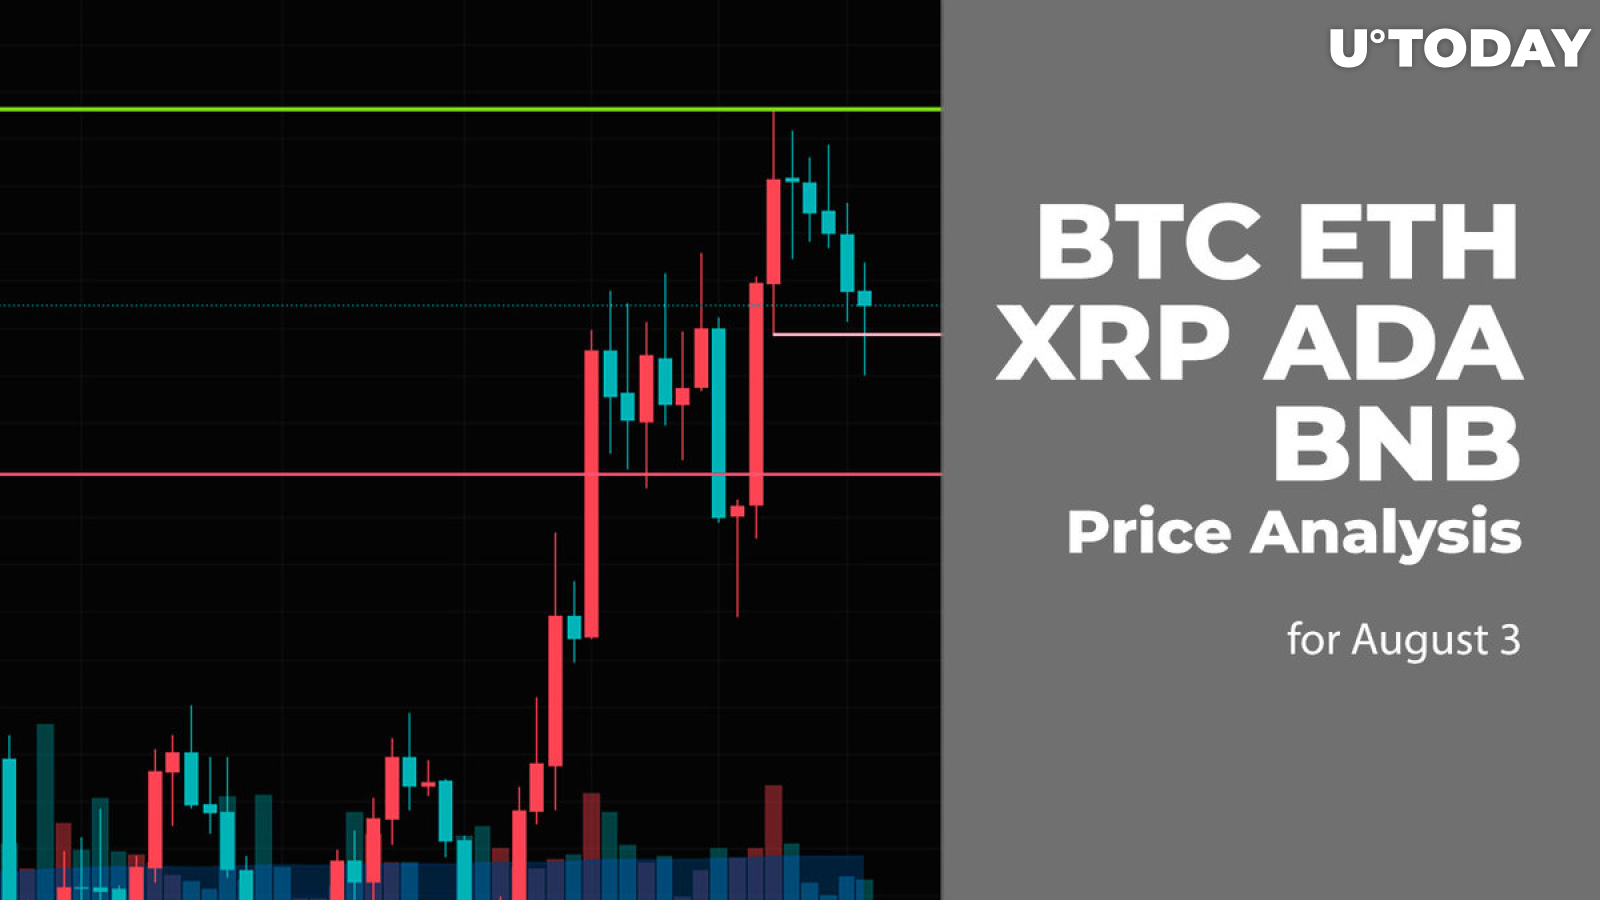 BTC, ETH, XRP, ADA and BNB Price Analysis for August 3